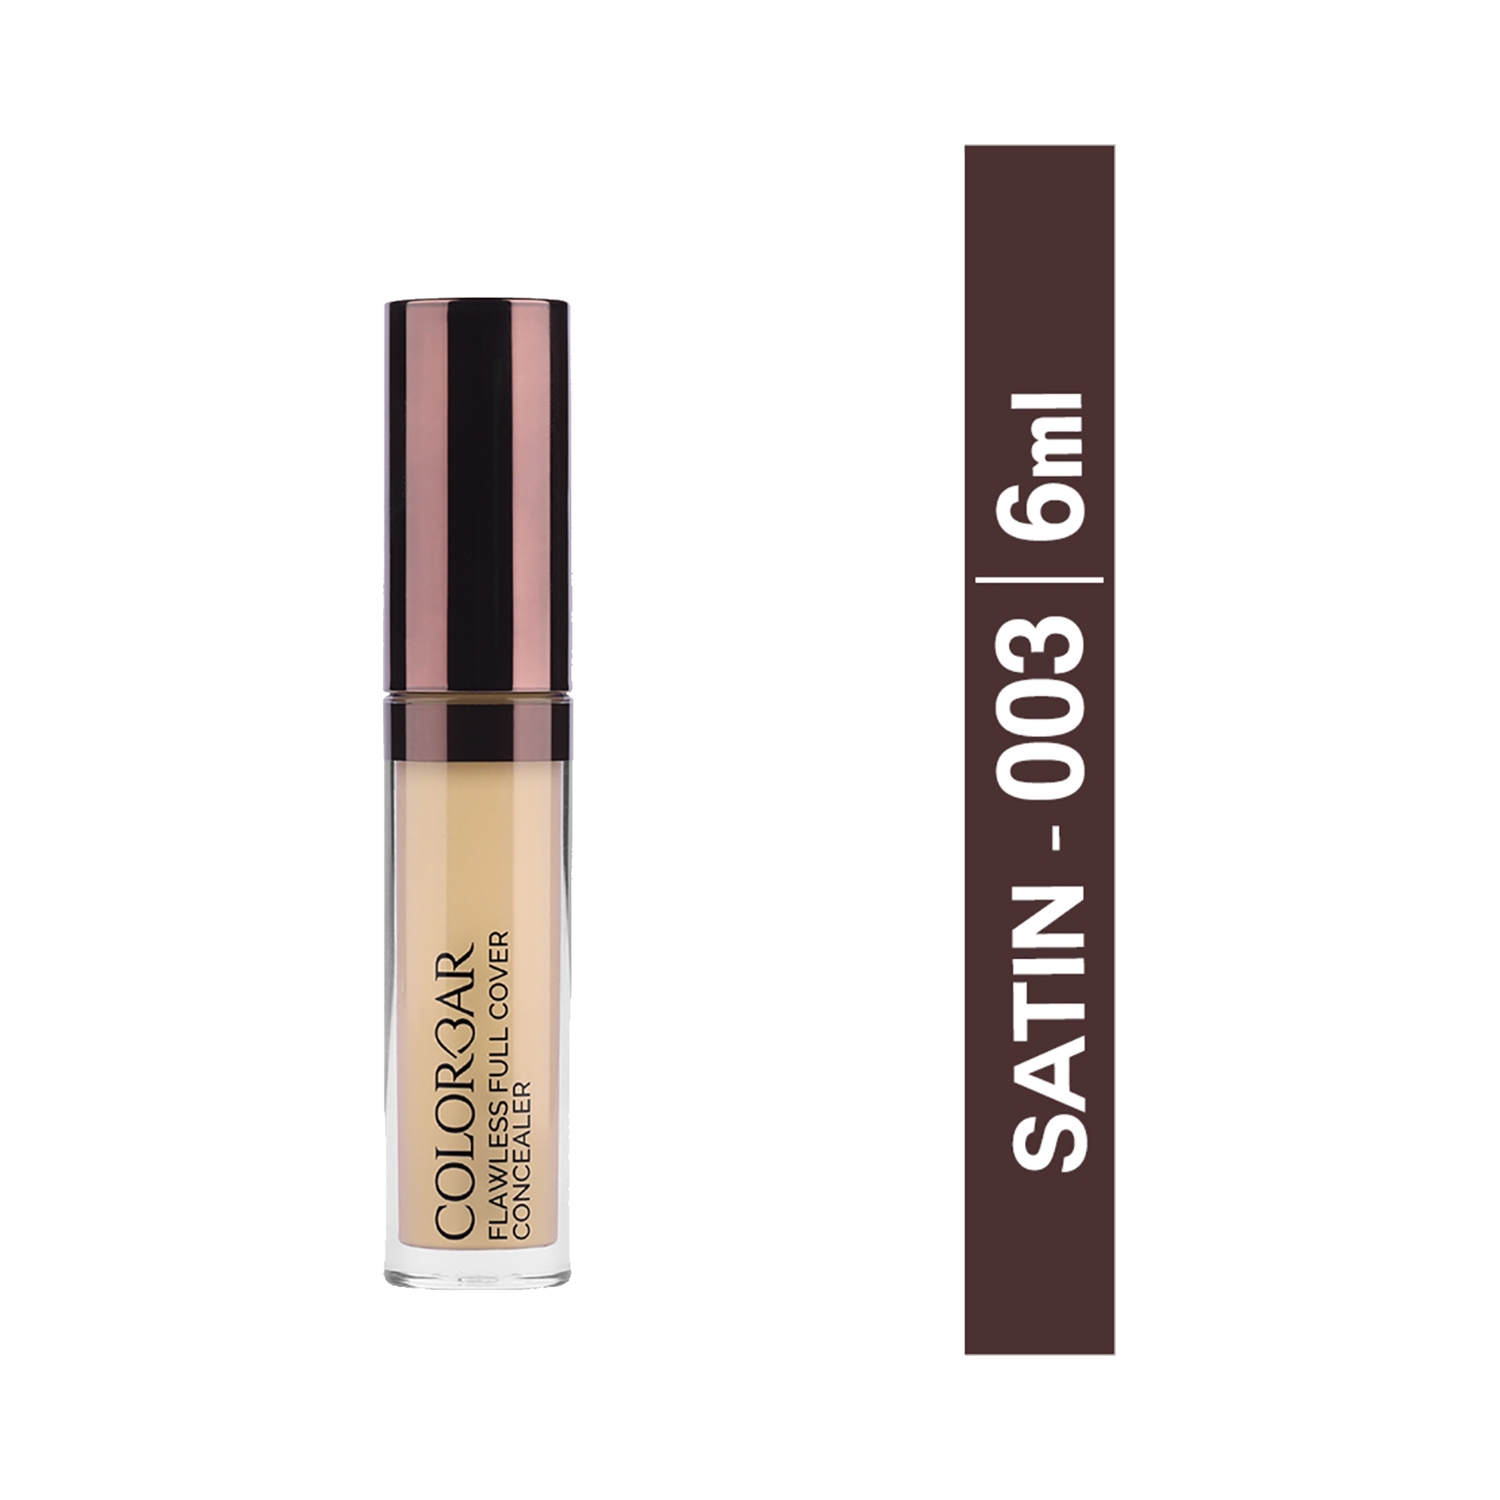 Colorbar | Colorbar Flawless Full Cover Concealer New - 003 Satin (6ml)